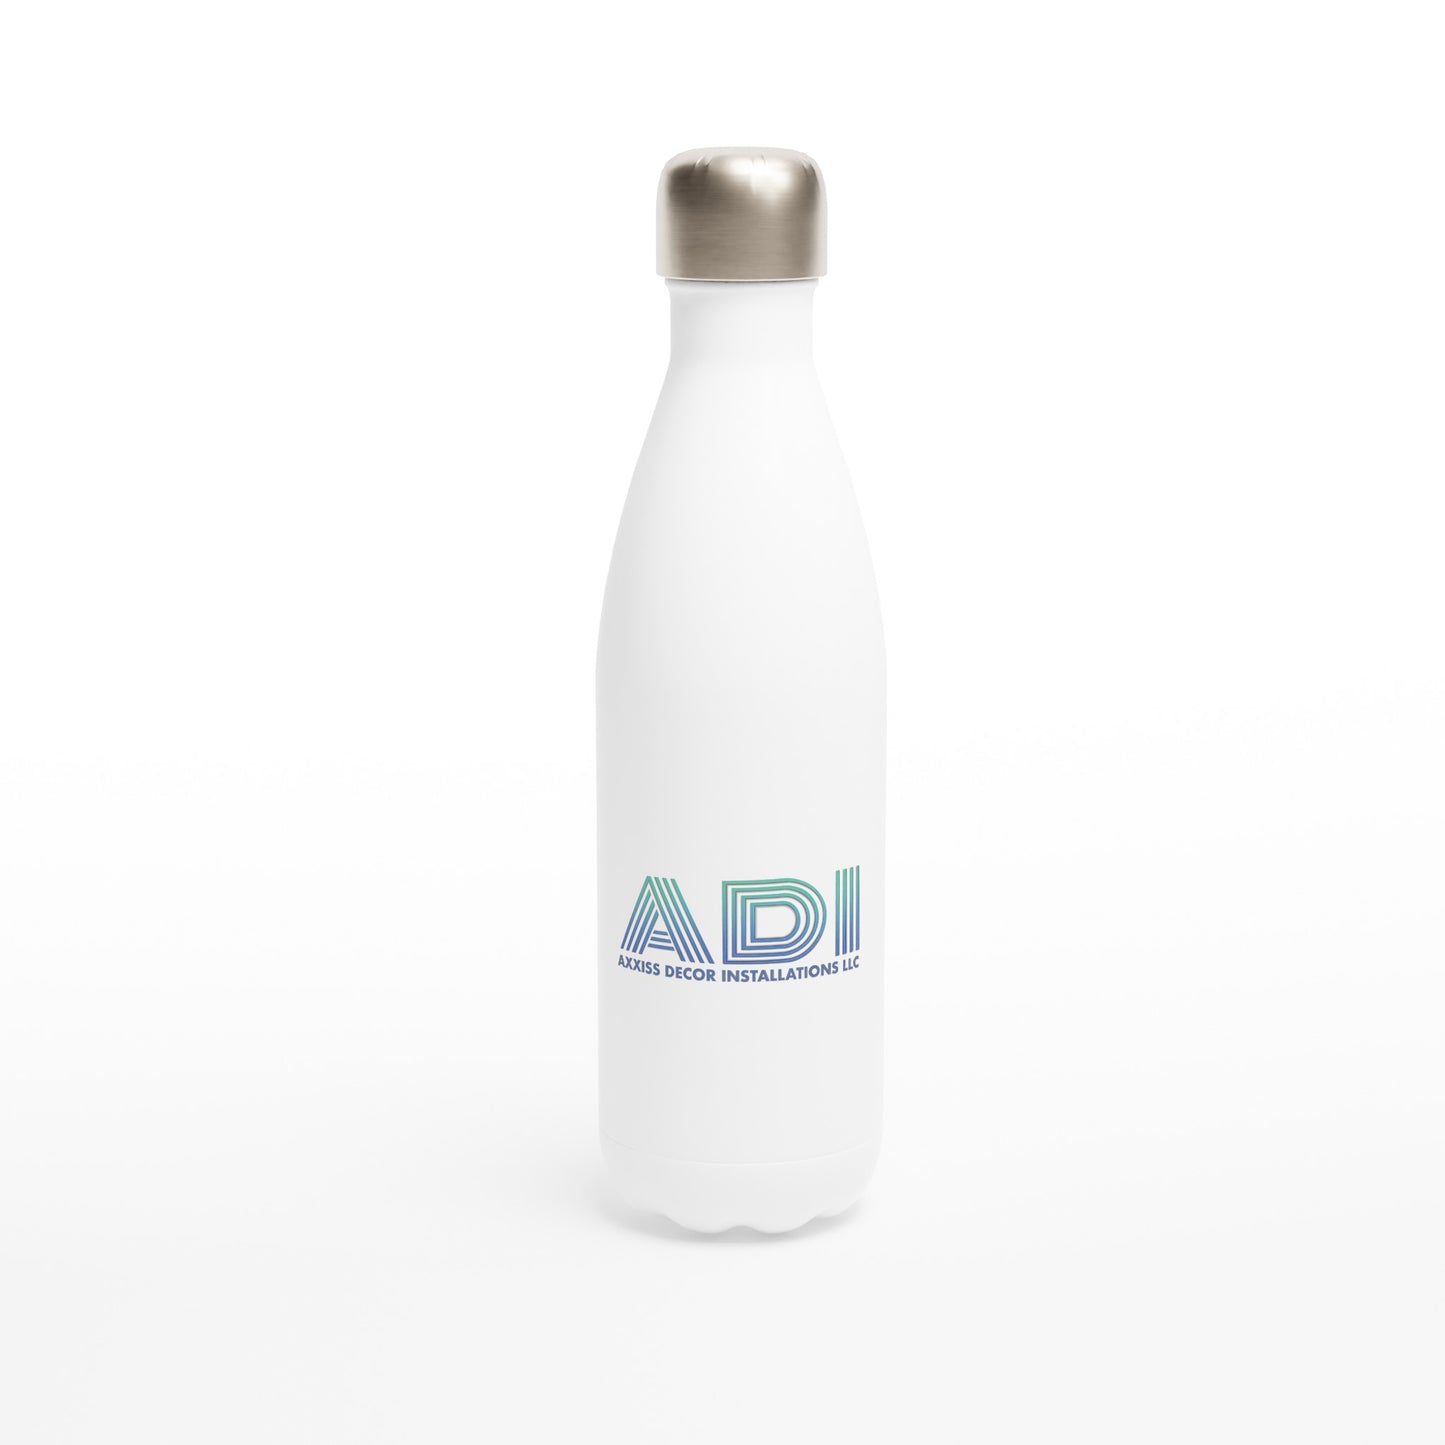 ADI-Axxis Decor Installations, LLC - White 17oz Stainless Steel Water Bottle